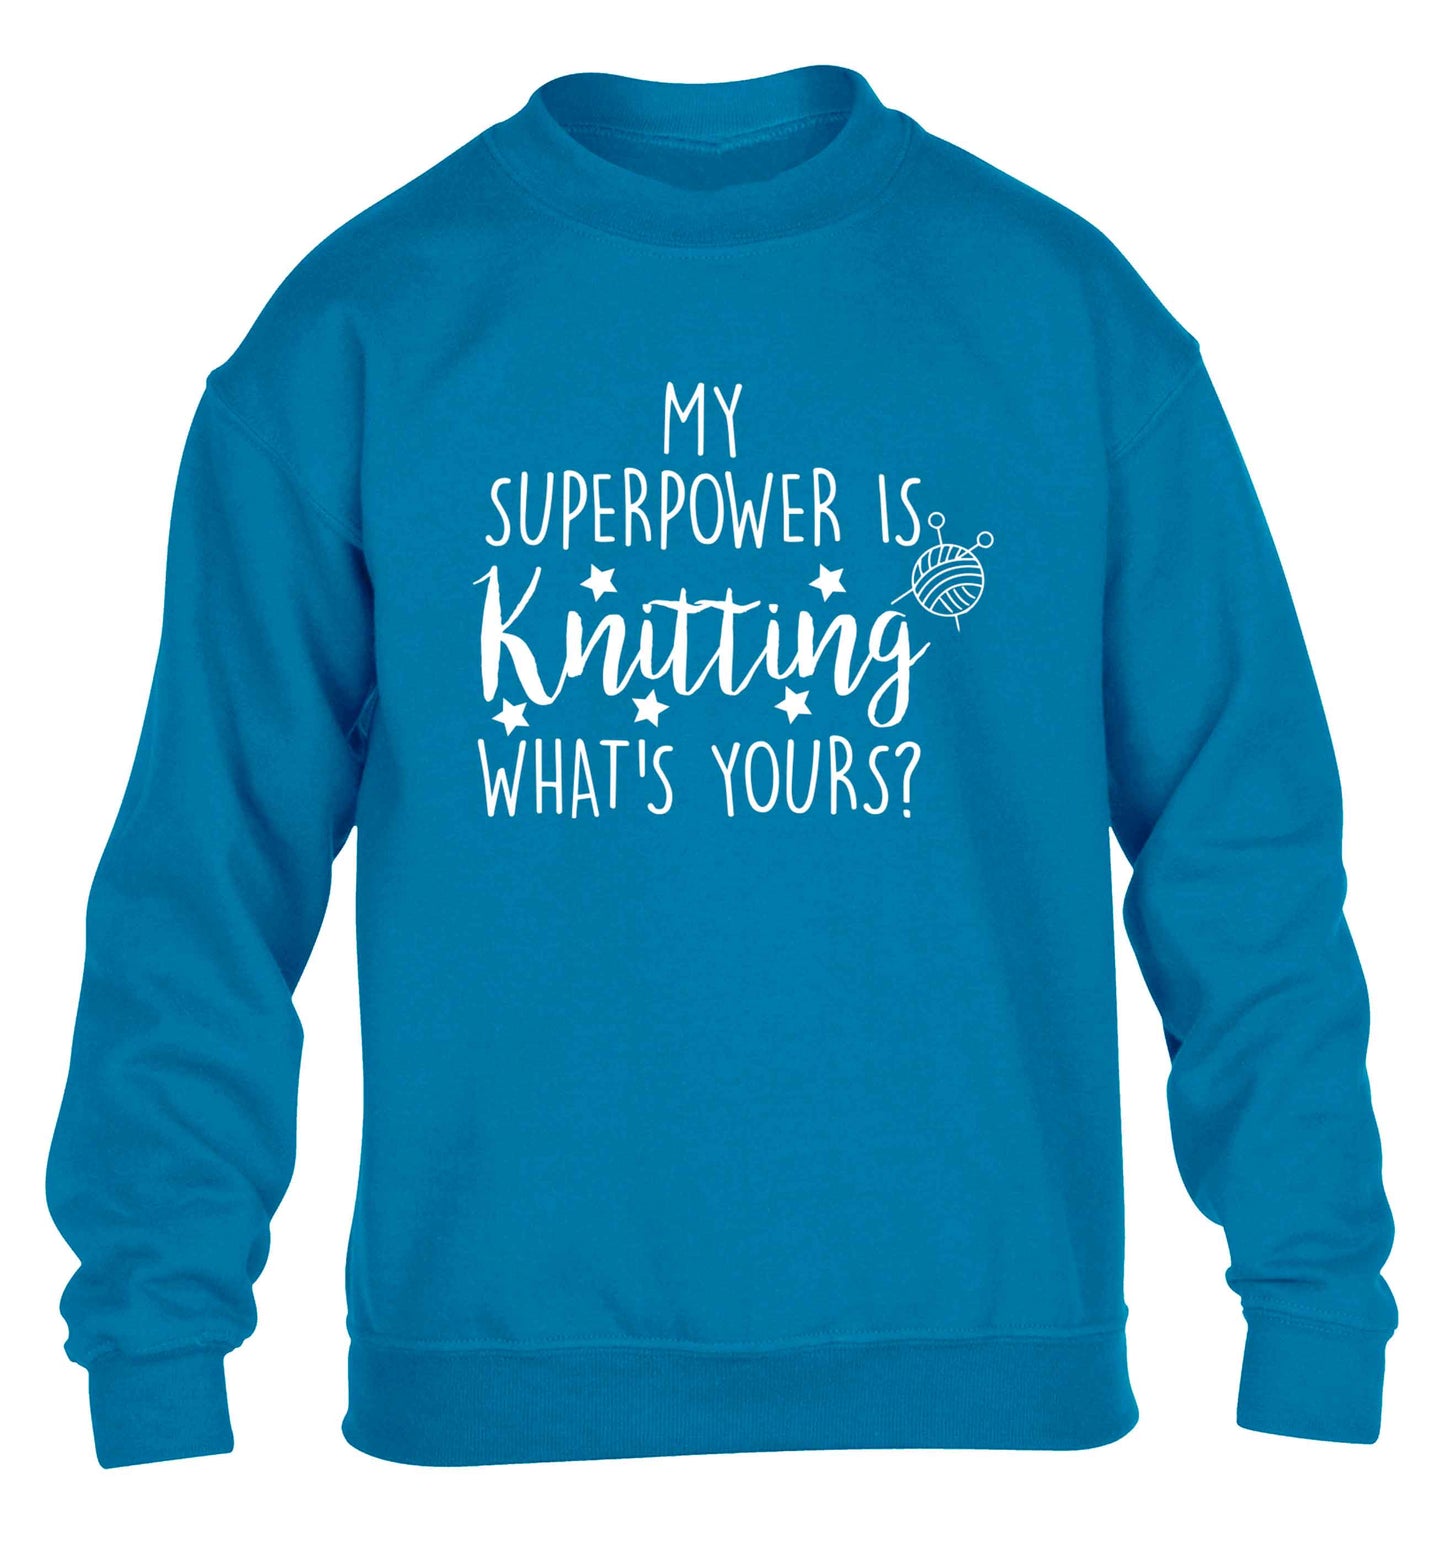 Knitting is my Superpower What's Yours? children's blue sweater 12-13 Years